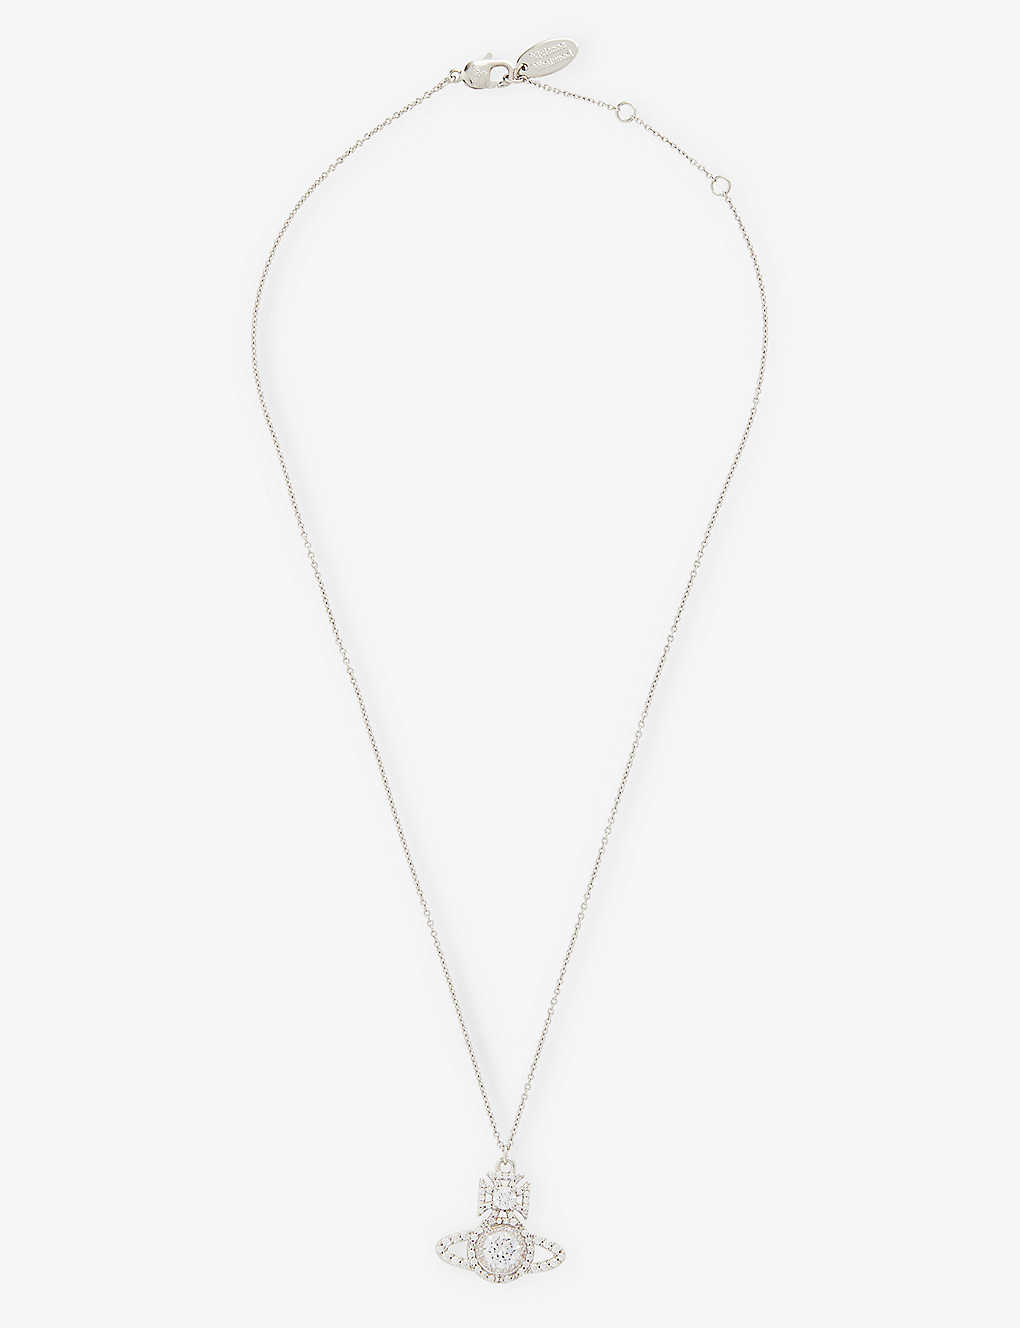 Vivienne Westwood Jewellery Norabelle Brass And Cubic Zirconia Necklace In Platinum / White Cz